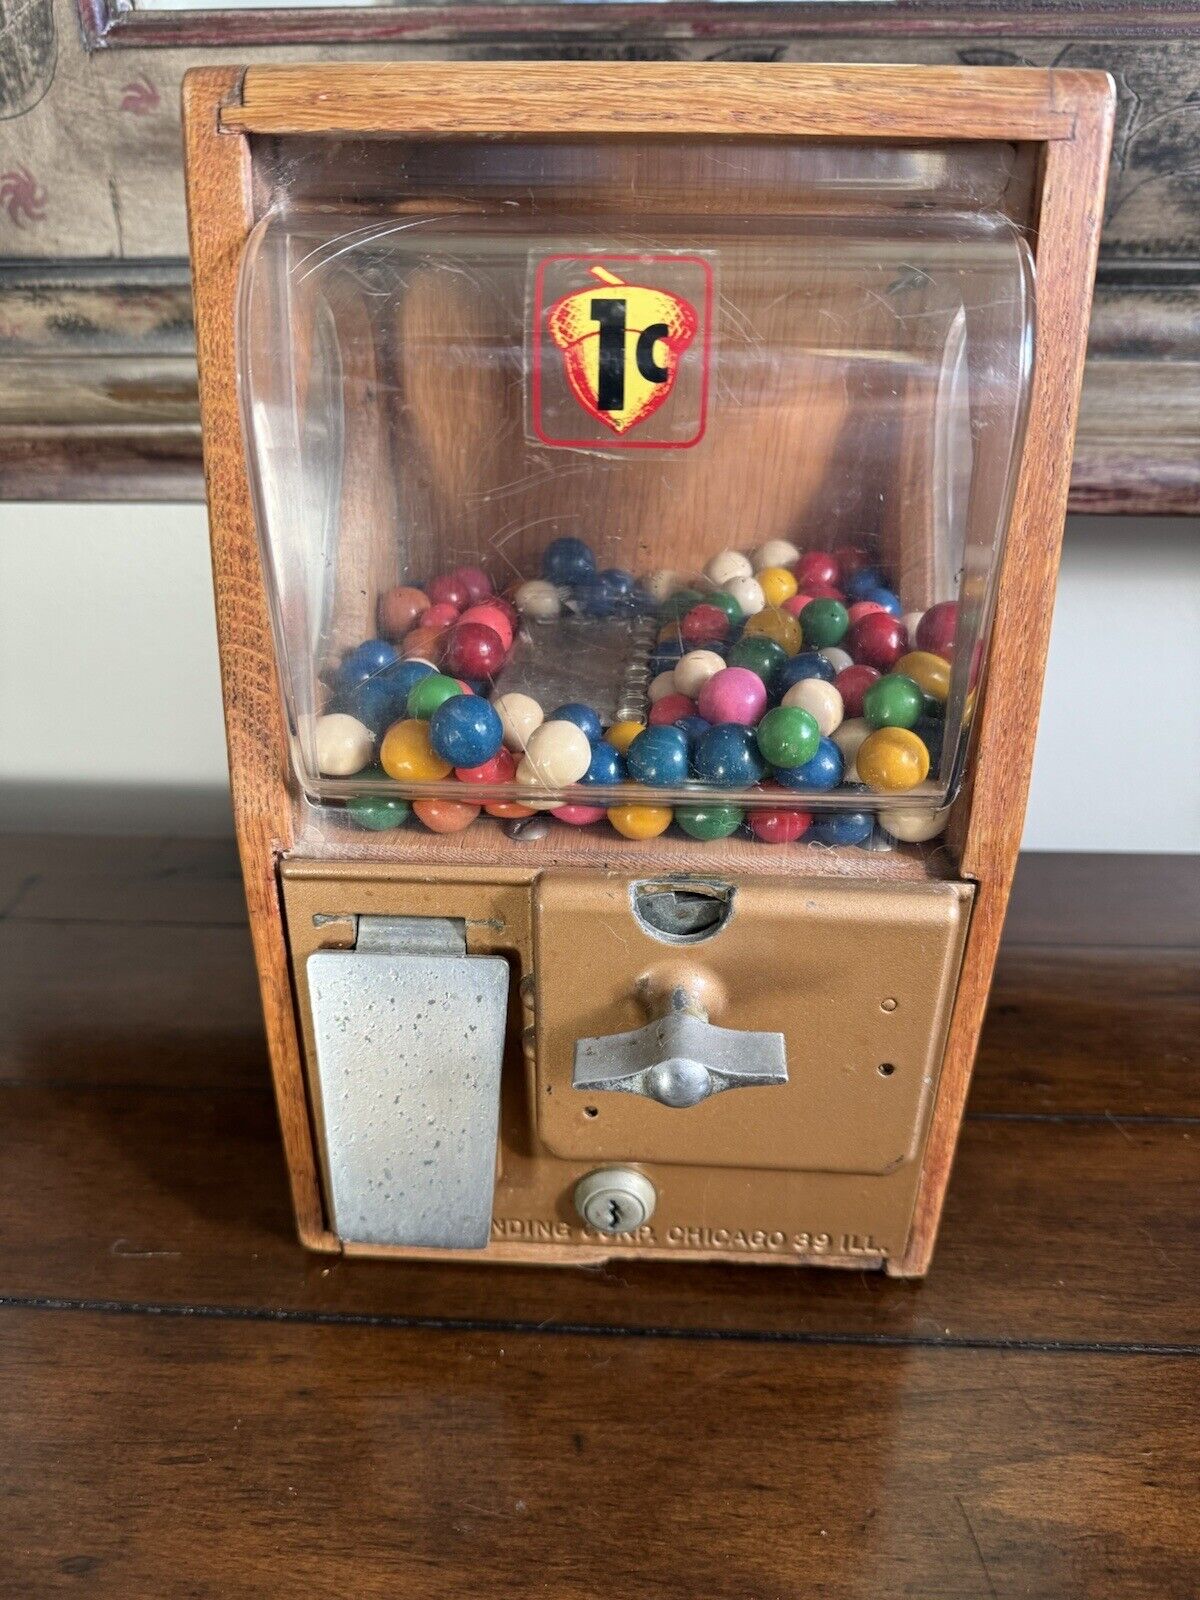 Victor Vending Corp Chicago 39 ILL - 1 Cent Vintage Gumball Machine No Key